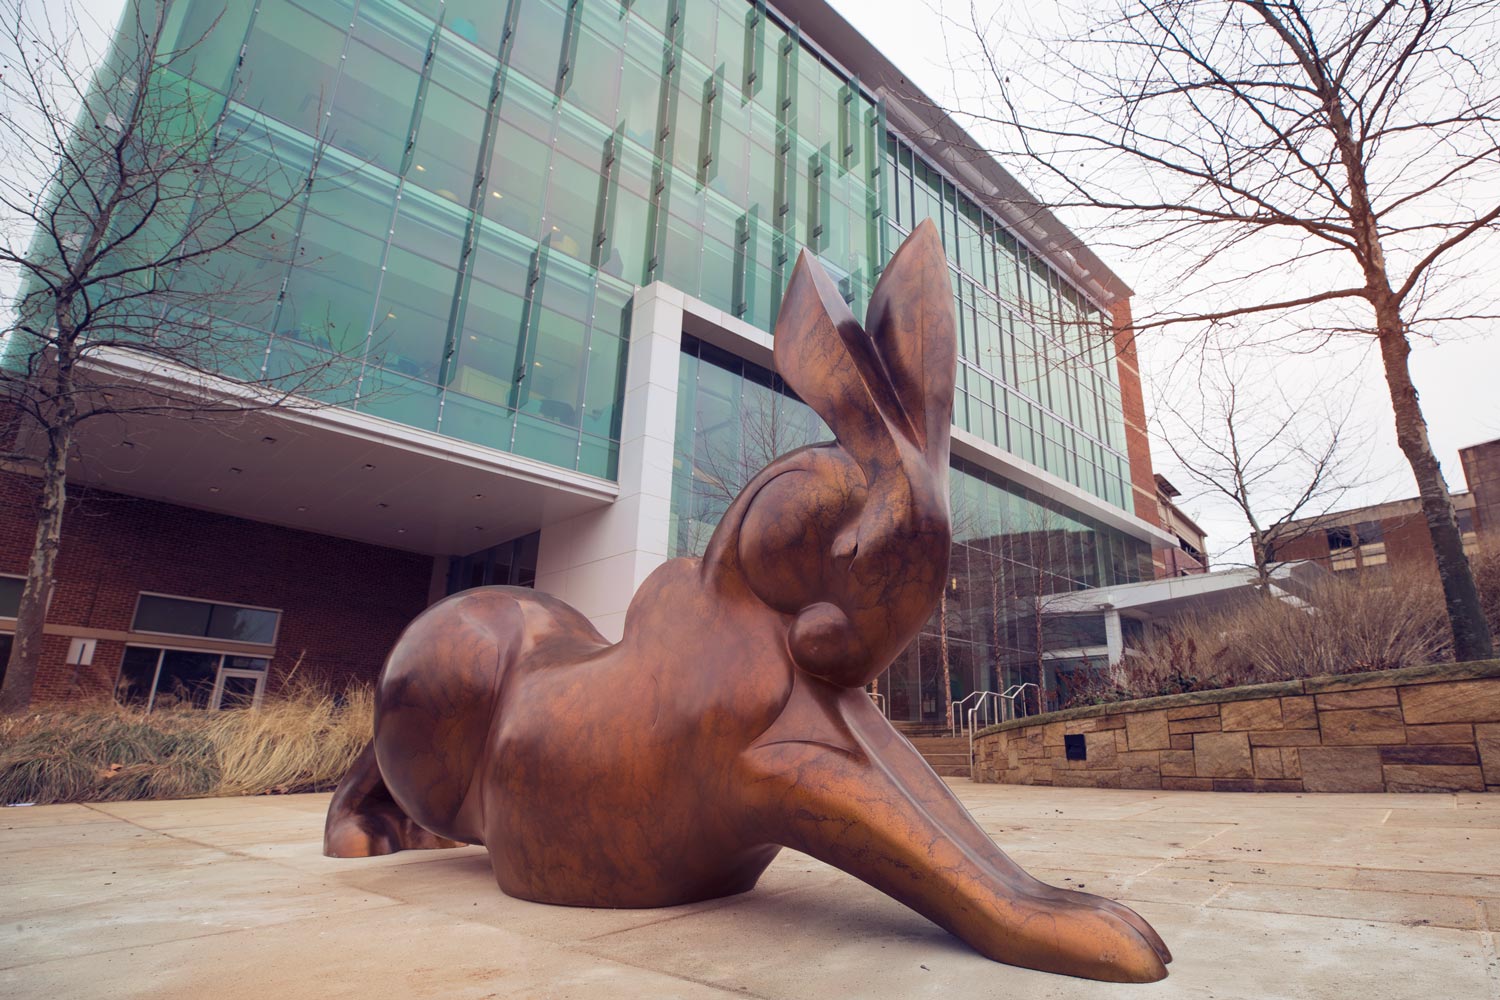 A big bronze bunny statue in front of a building